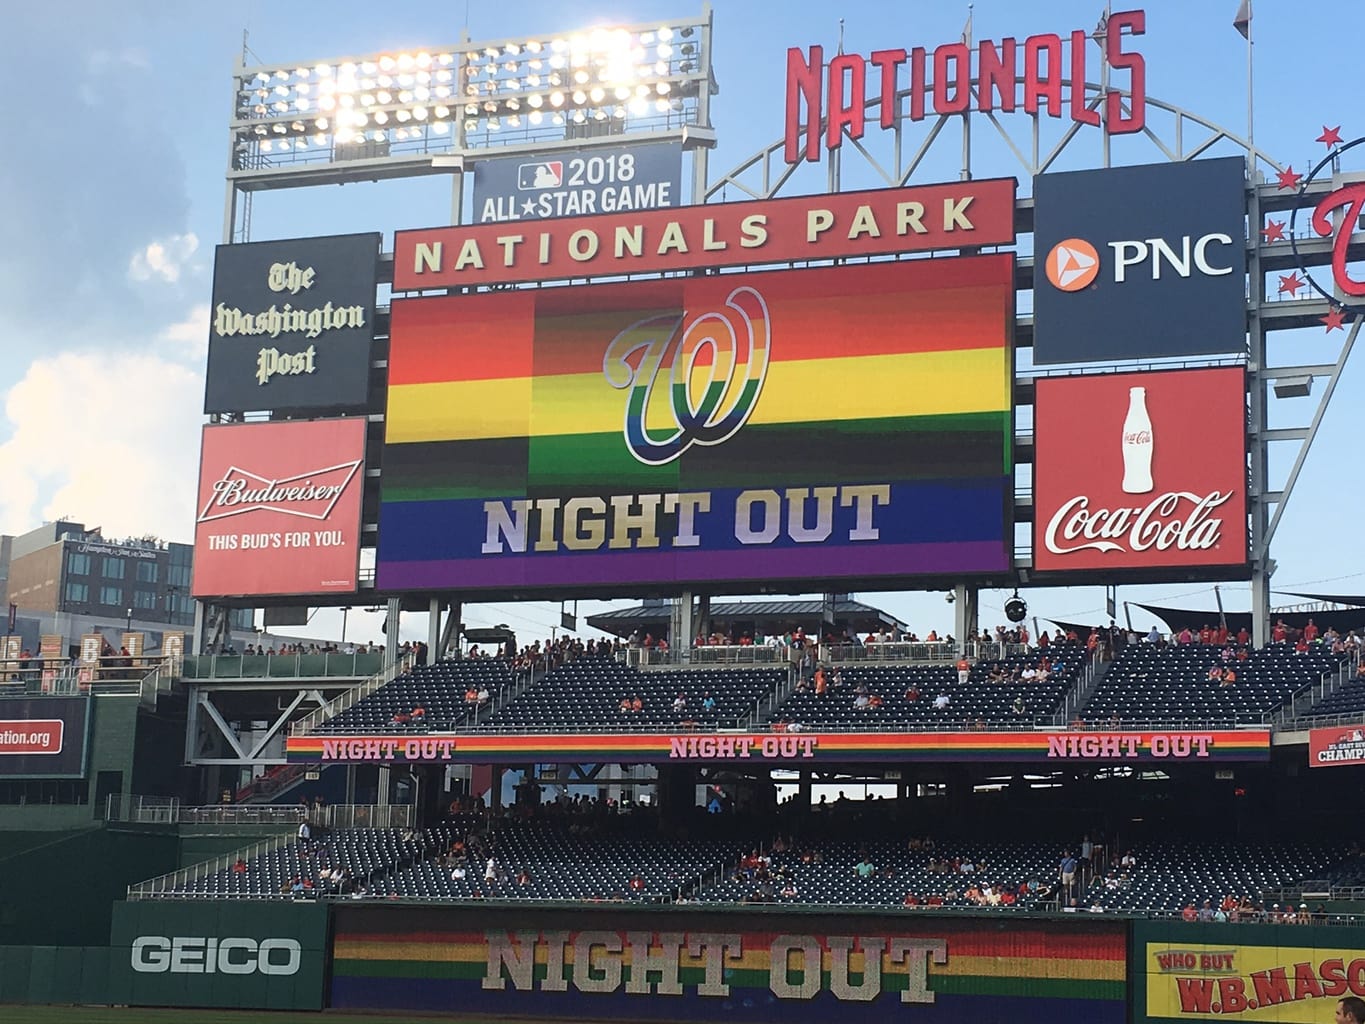 Updated: Night OUT at the Nationals